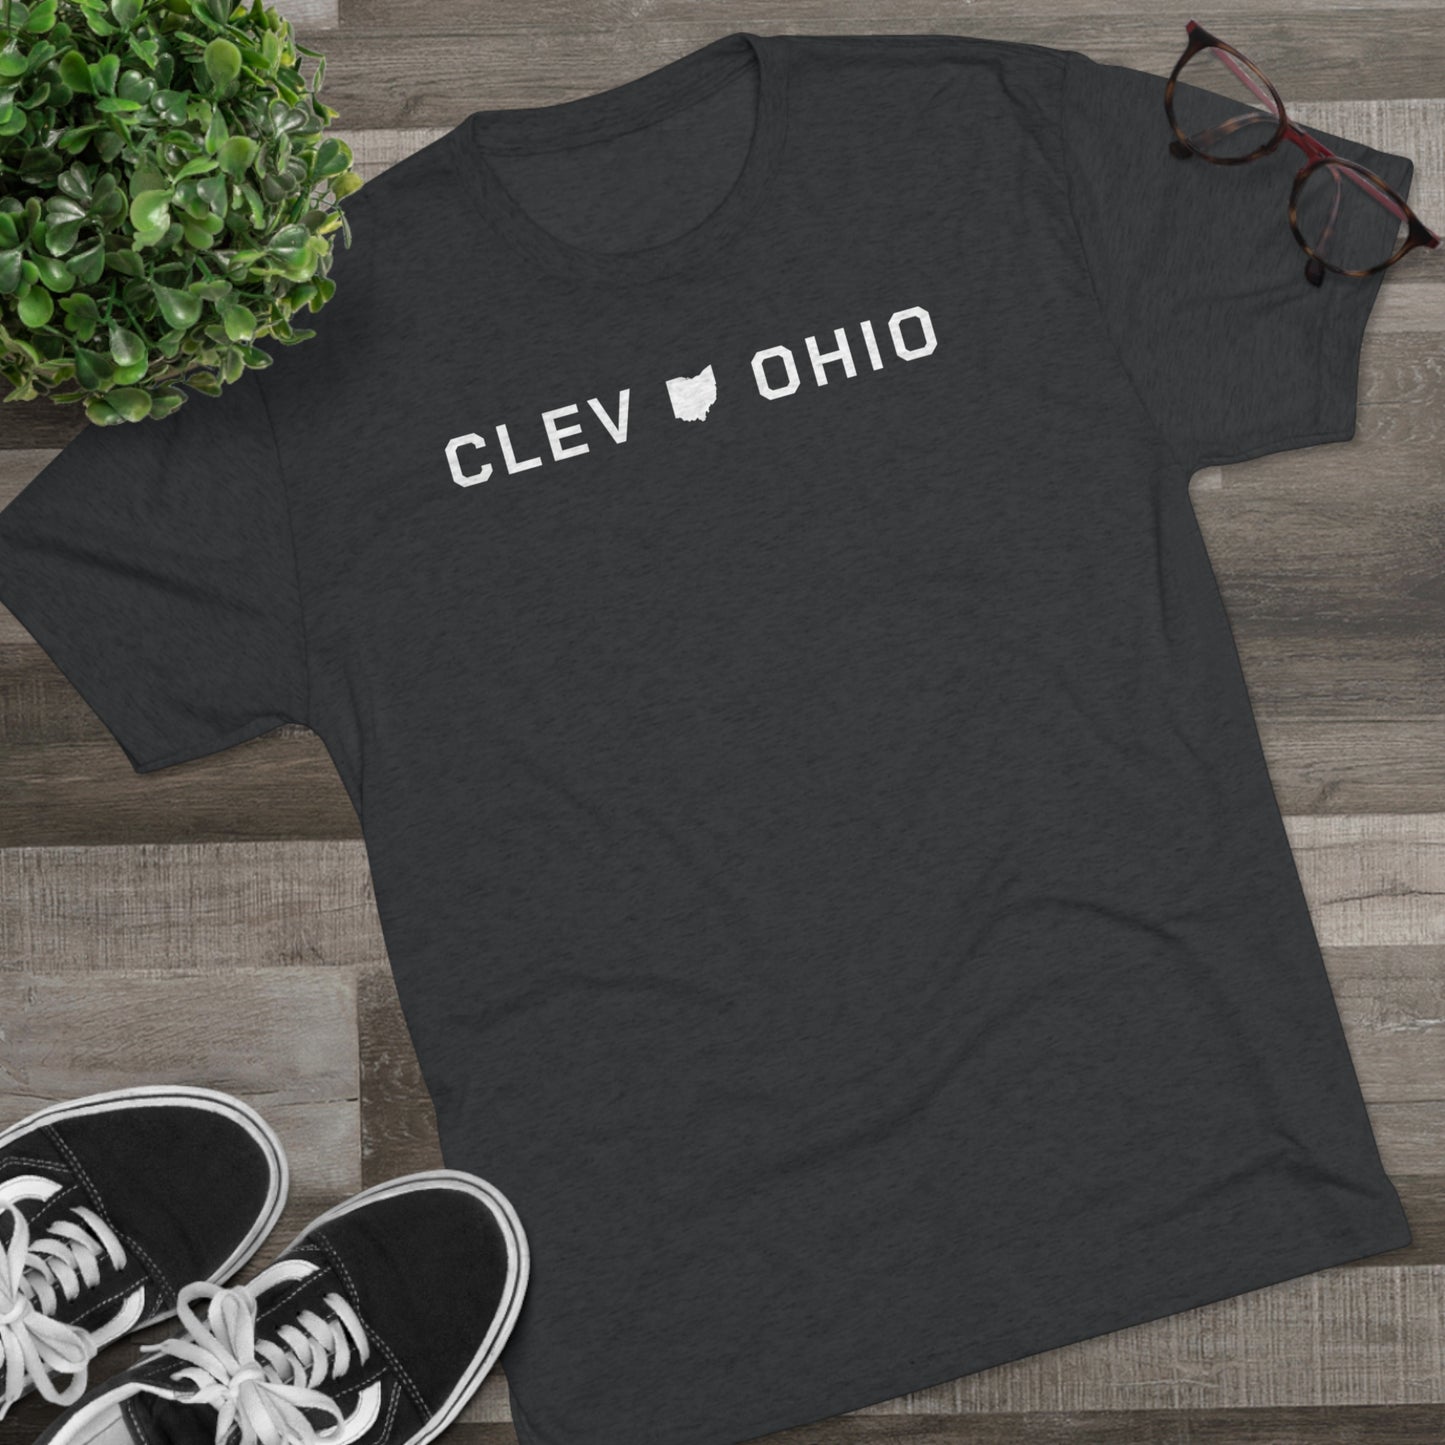 CLEV (state shape) OHIO - Unisex Tri-Blend Crew Tee